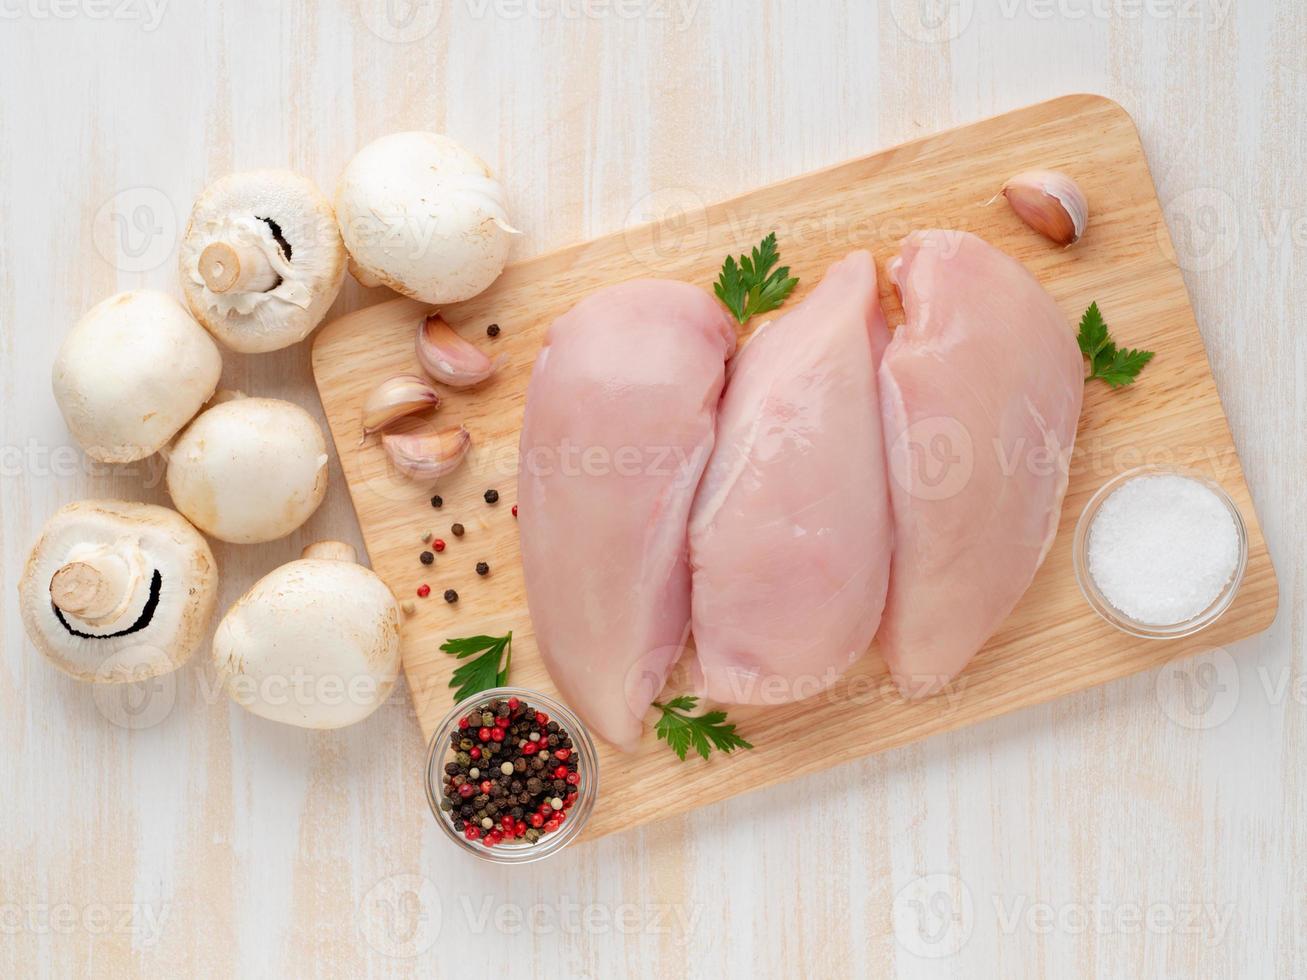 raw chicken breast fillet with spices on wooden board on white wooden table photo